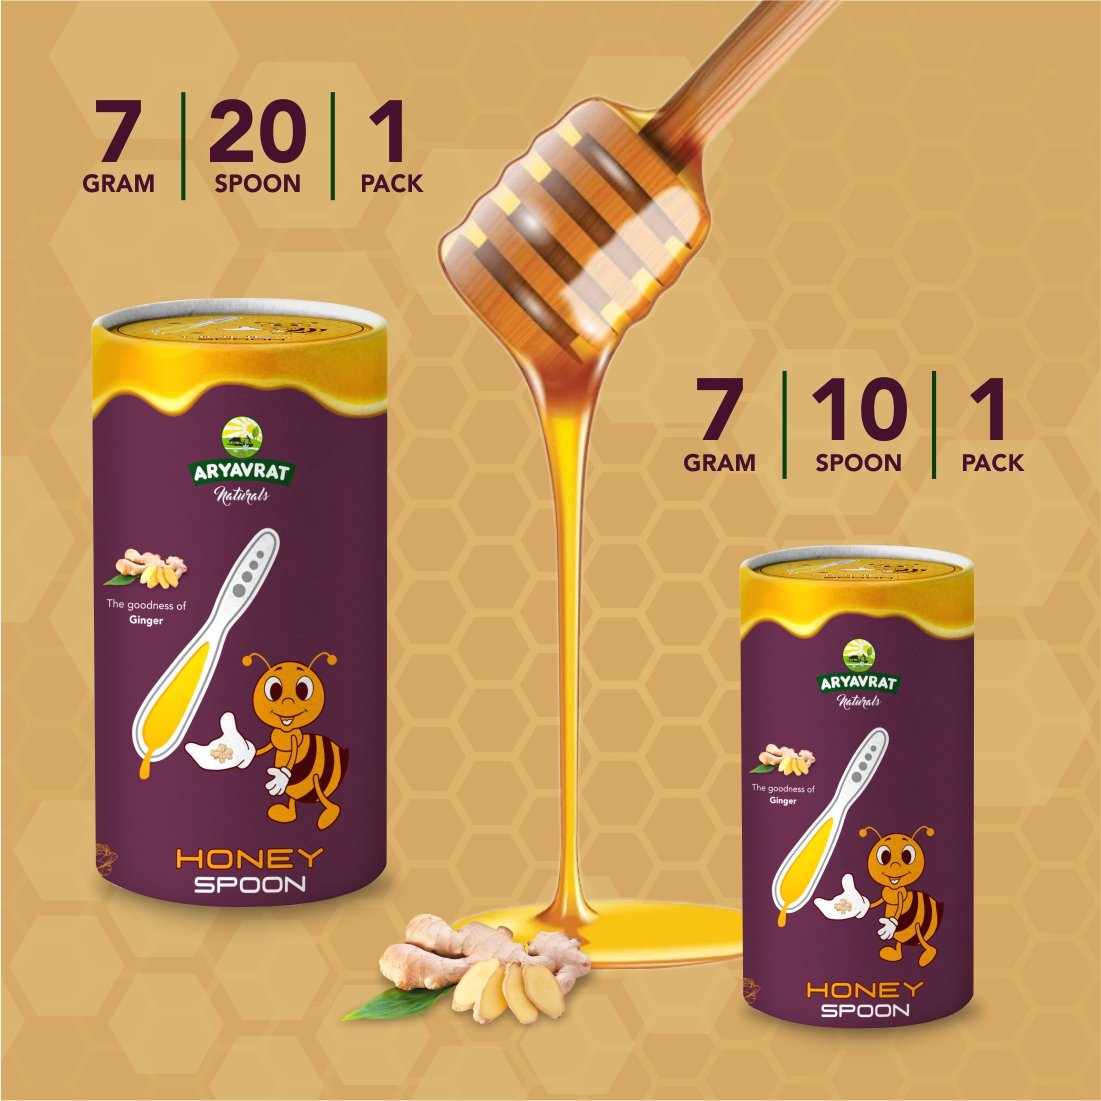 Buy Aryavrat Naturals -Ginger- Adrak Honey Spoon 100% Pure Organic and Natural Pack of Honey Spoons at Best Price Online